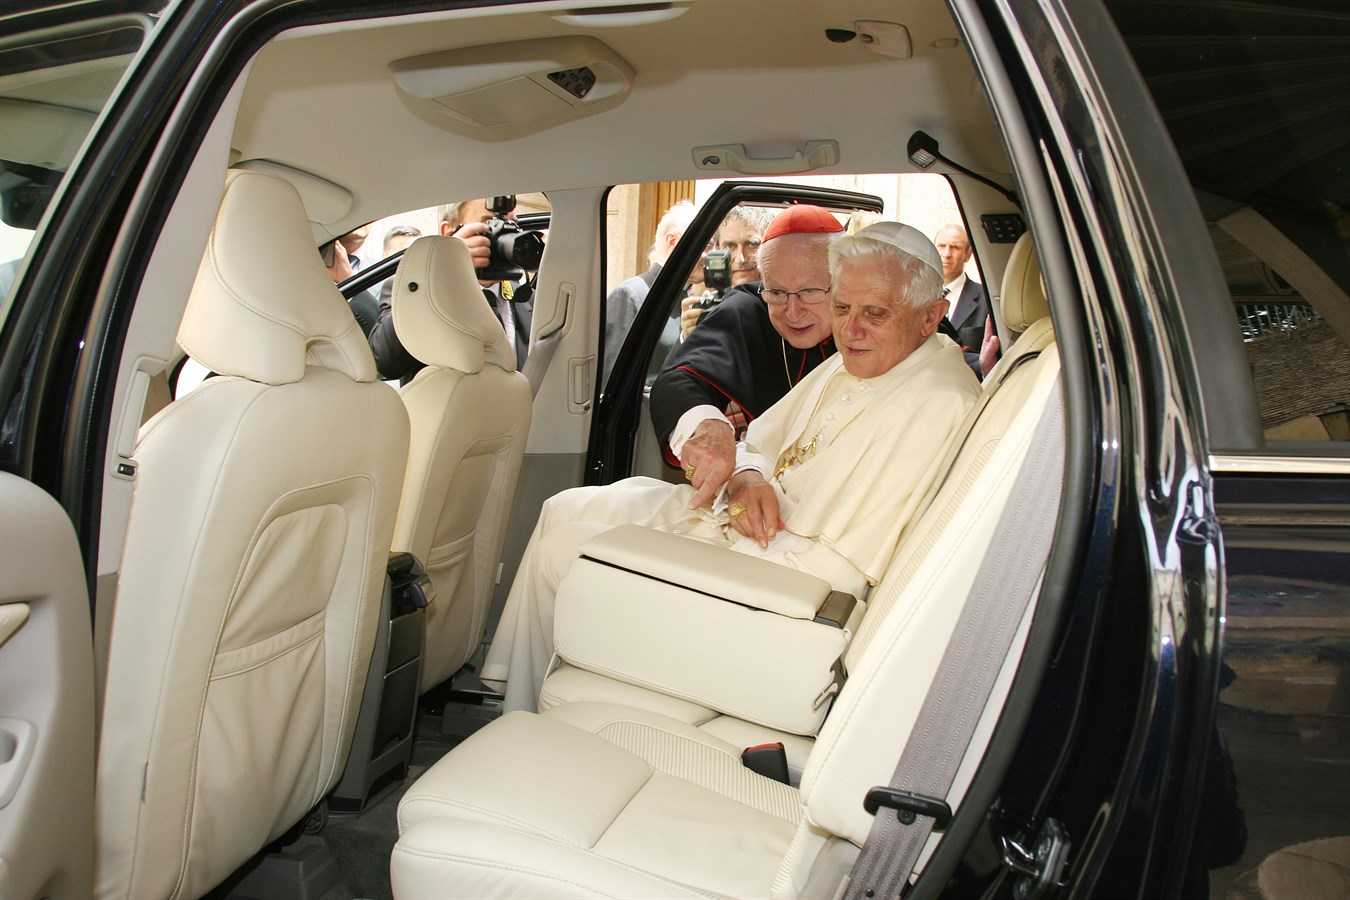 Volvo Cars presented His Holiness, Pope Benedict XVI, with a Volvo XC90 on Wednesday June 28th 2006